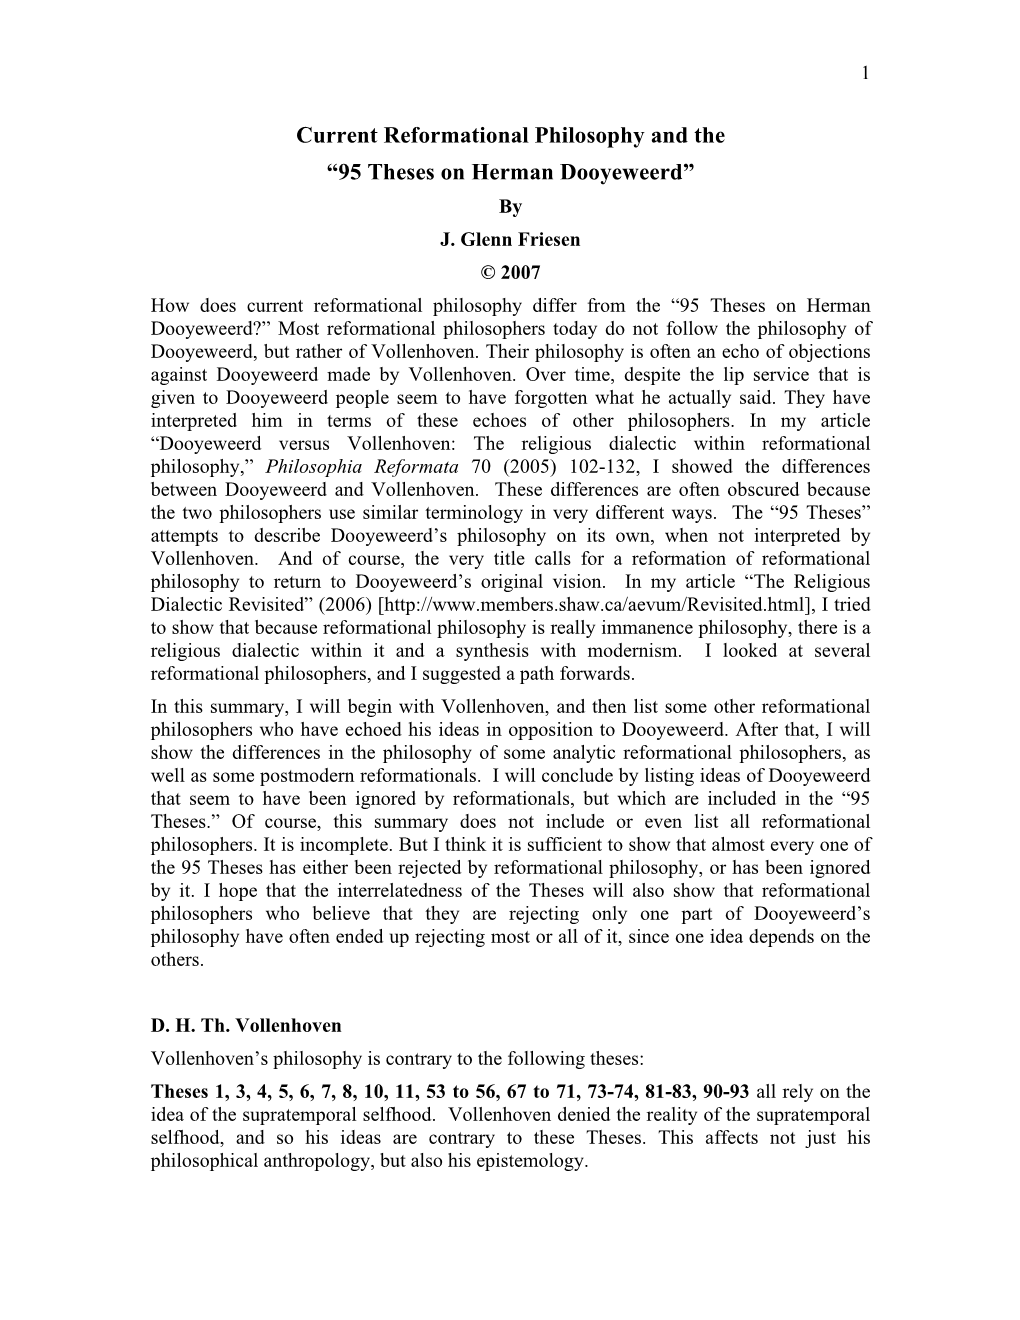 Current Reformational Philosophy and the “95 Theses on Herman Dooyeweerd” by J